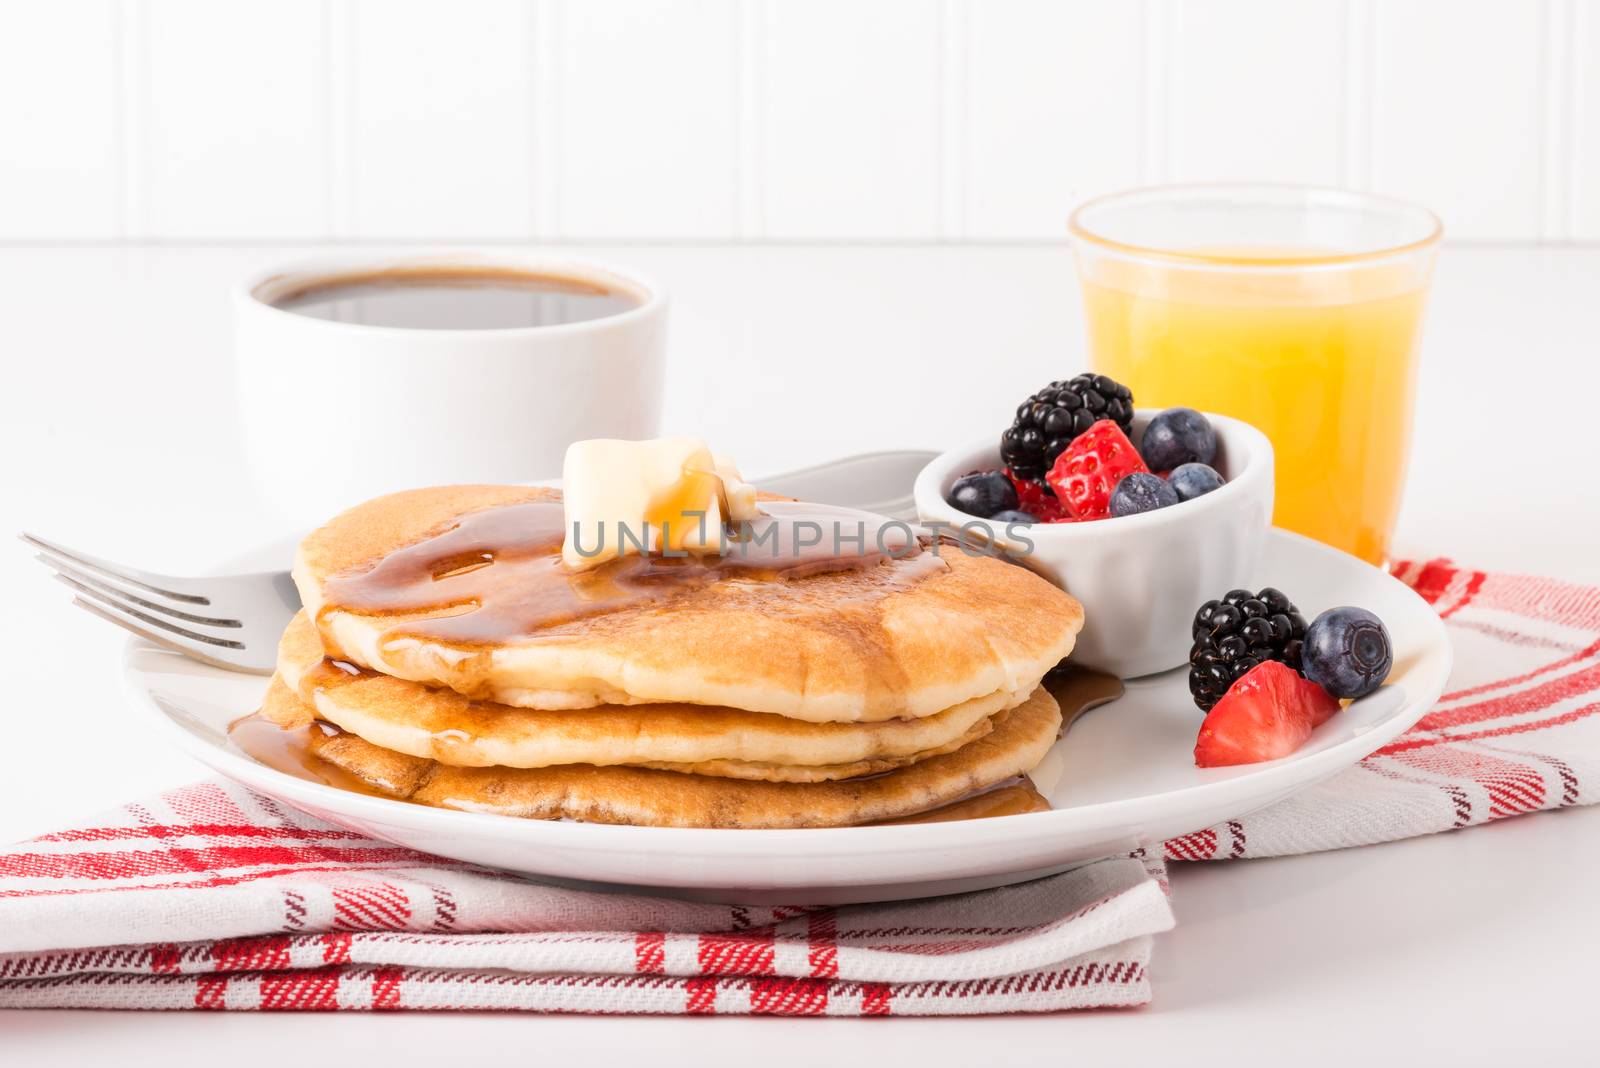 Pancakes by billberryphotography